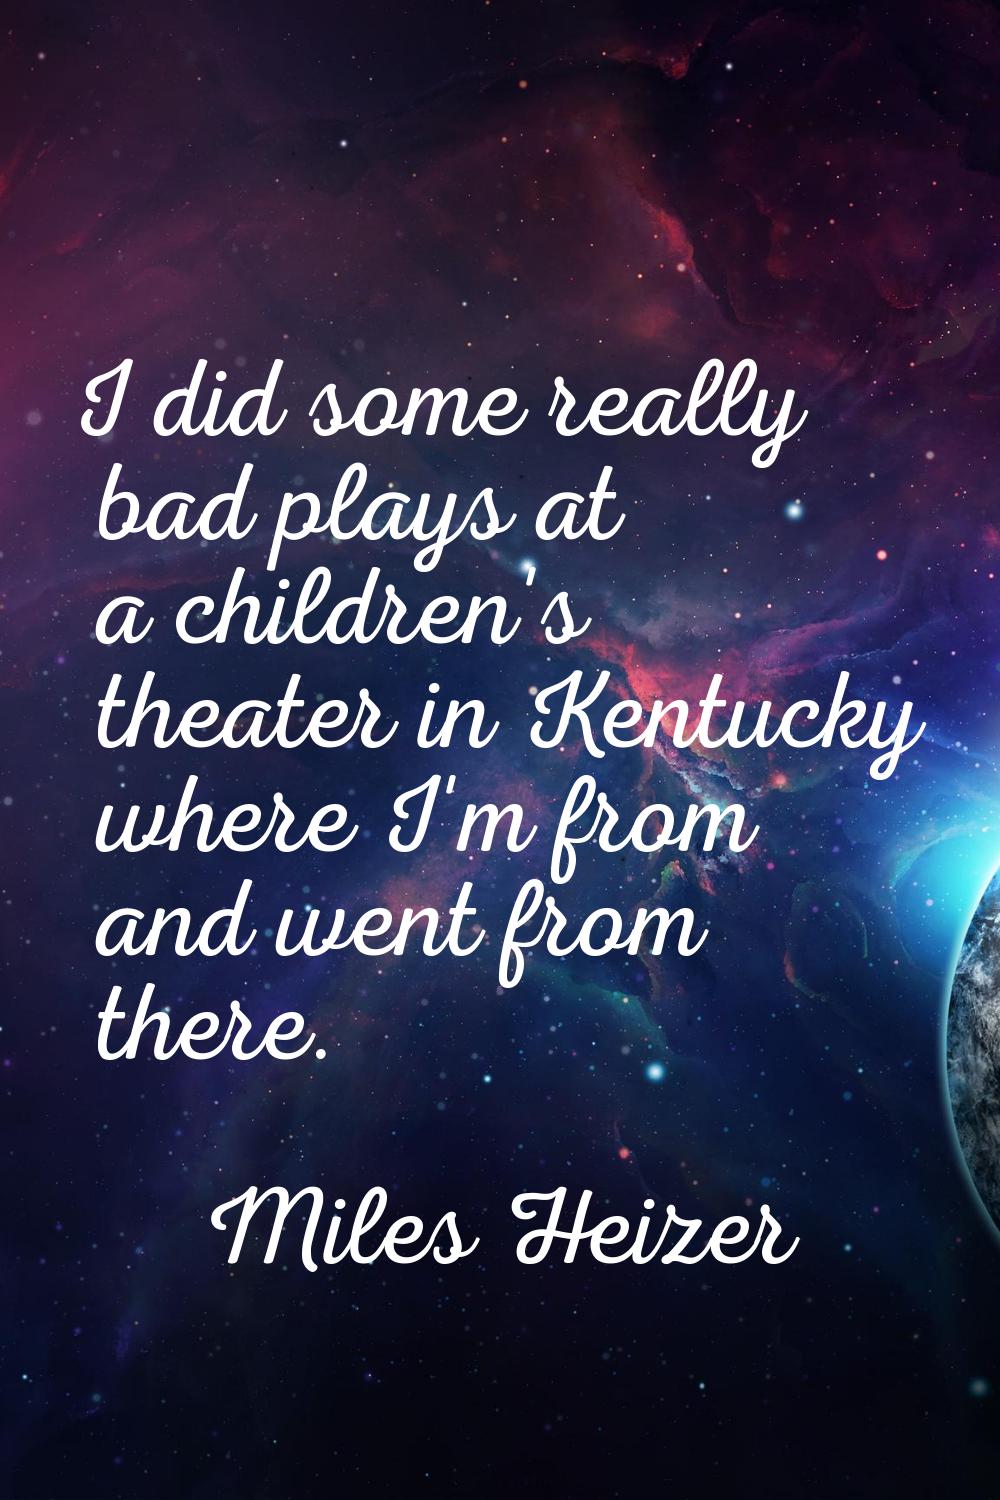 I did some really bad plays at a children's theater in Kentucky where I'm from and went from there.